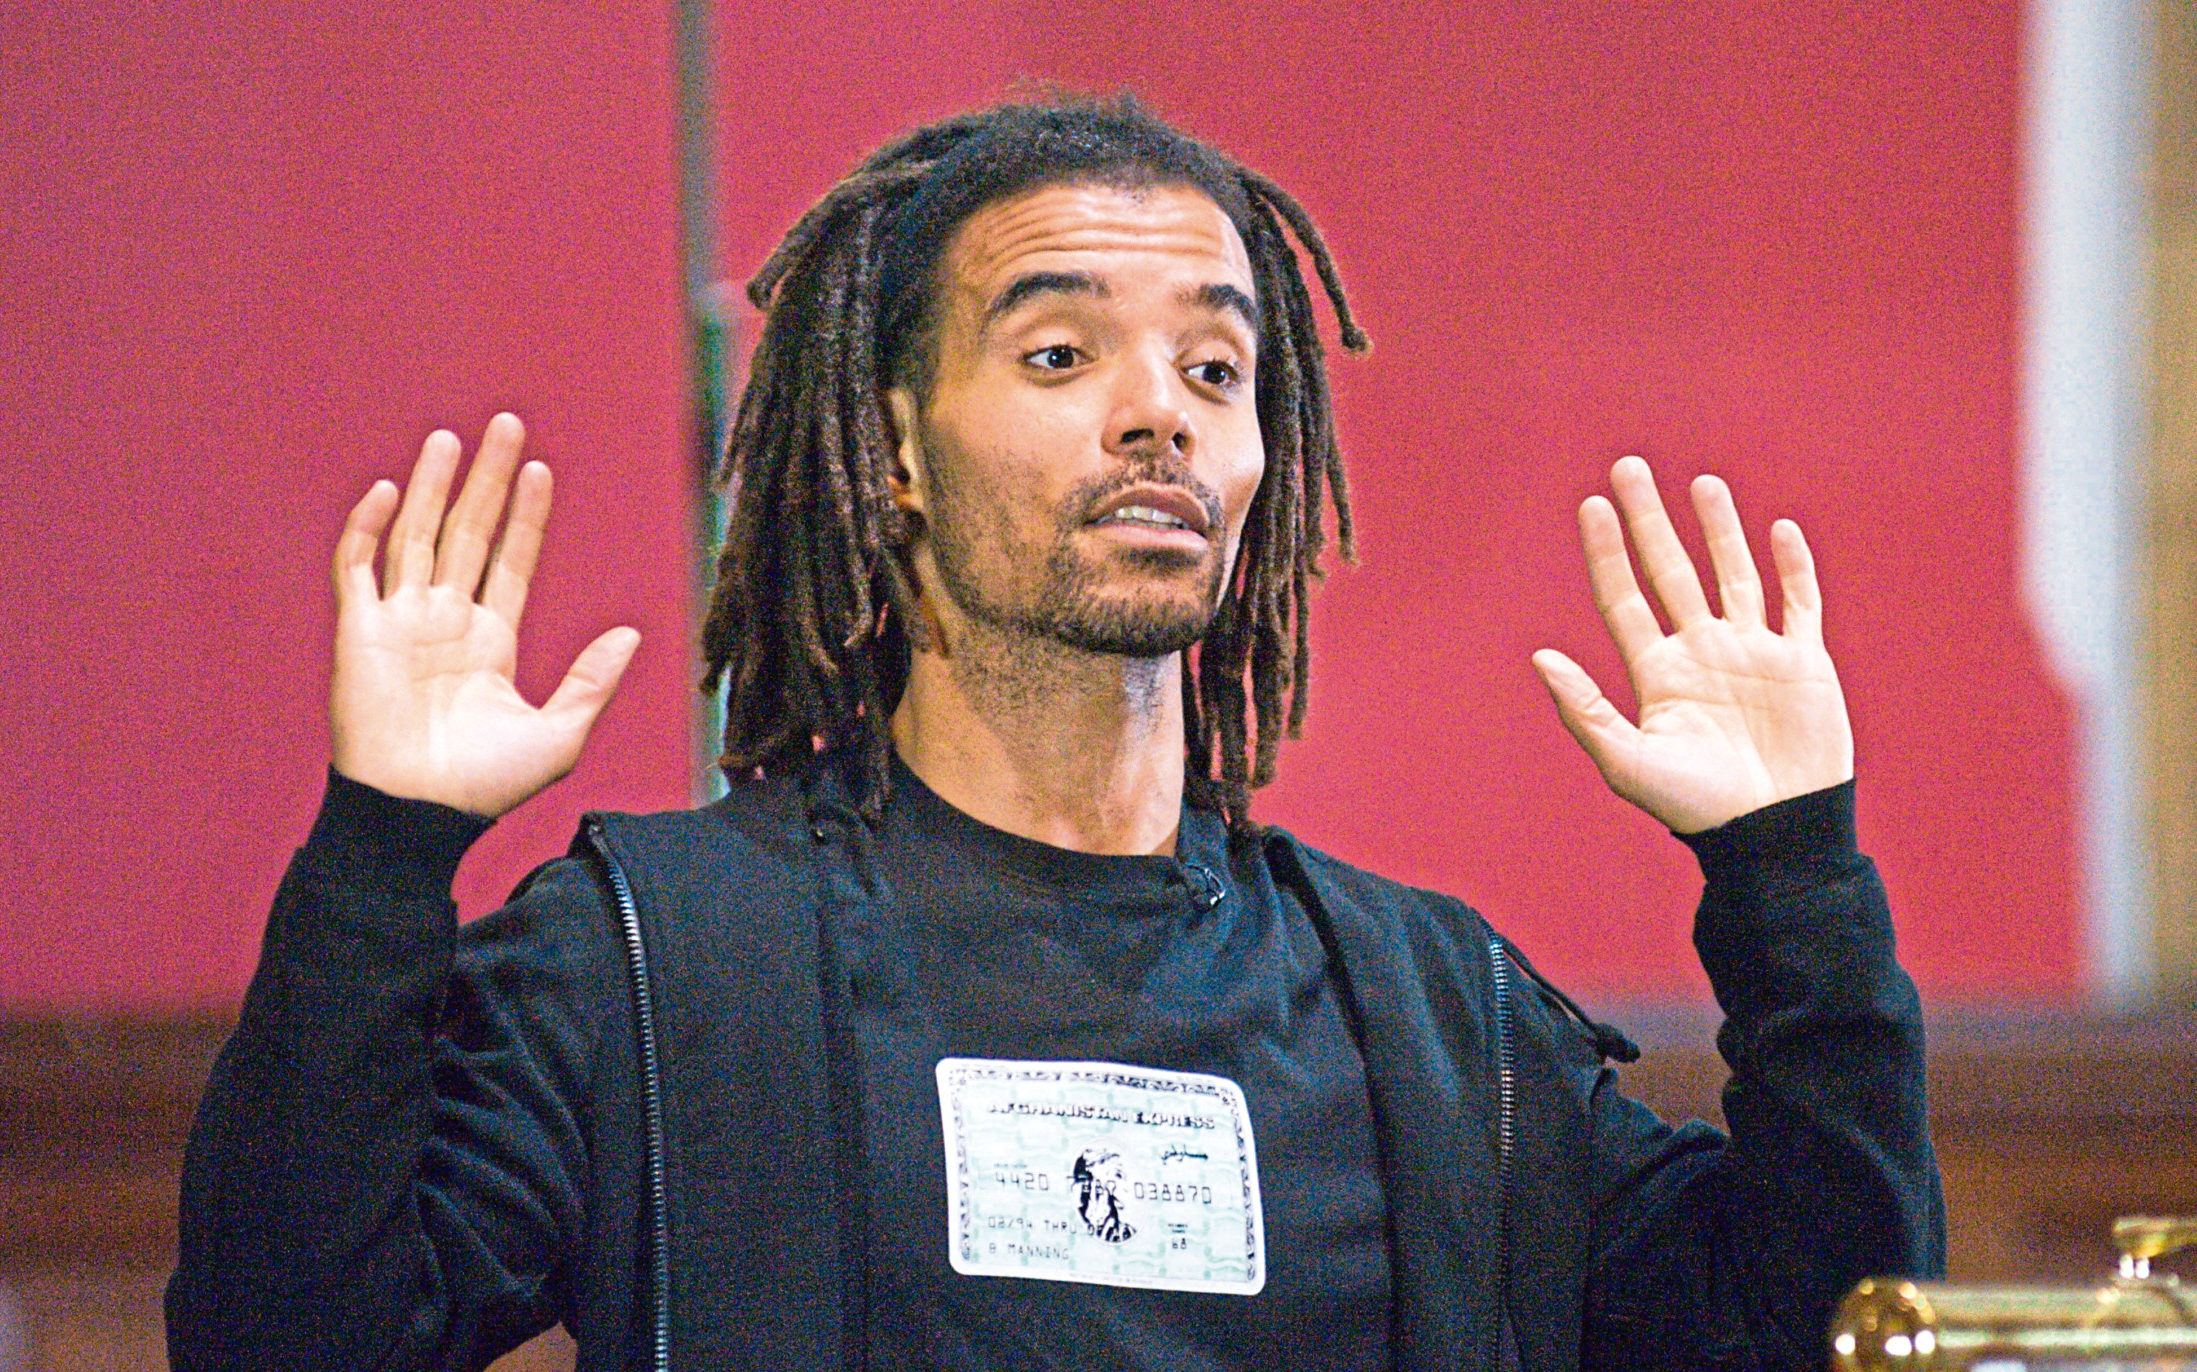 Akala features on an episode of Some You Win